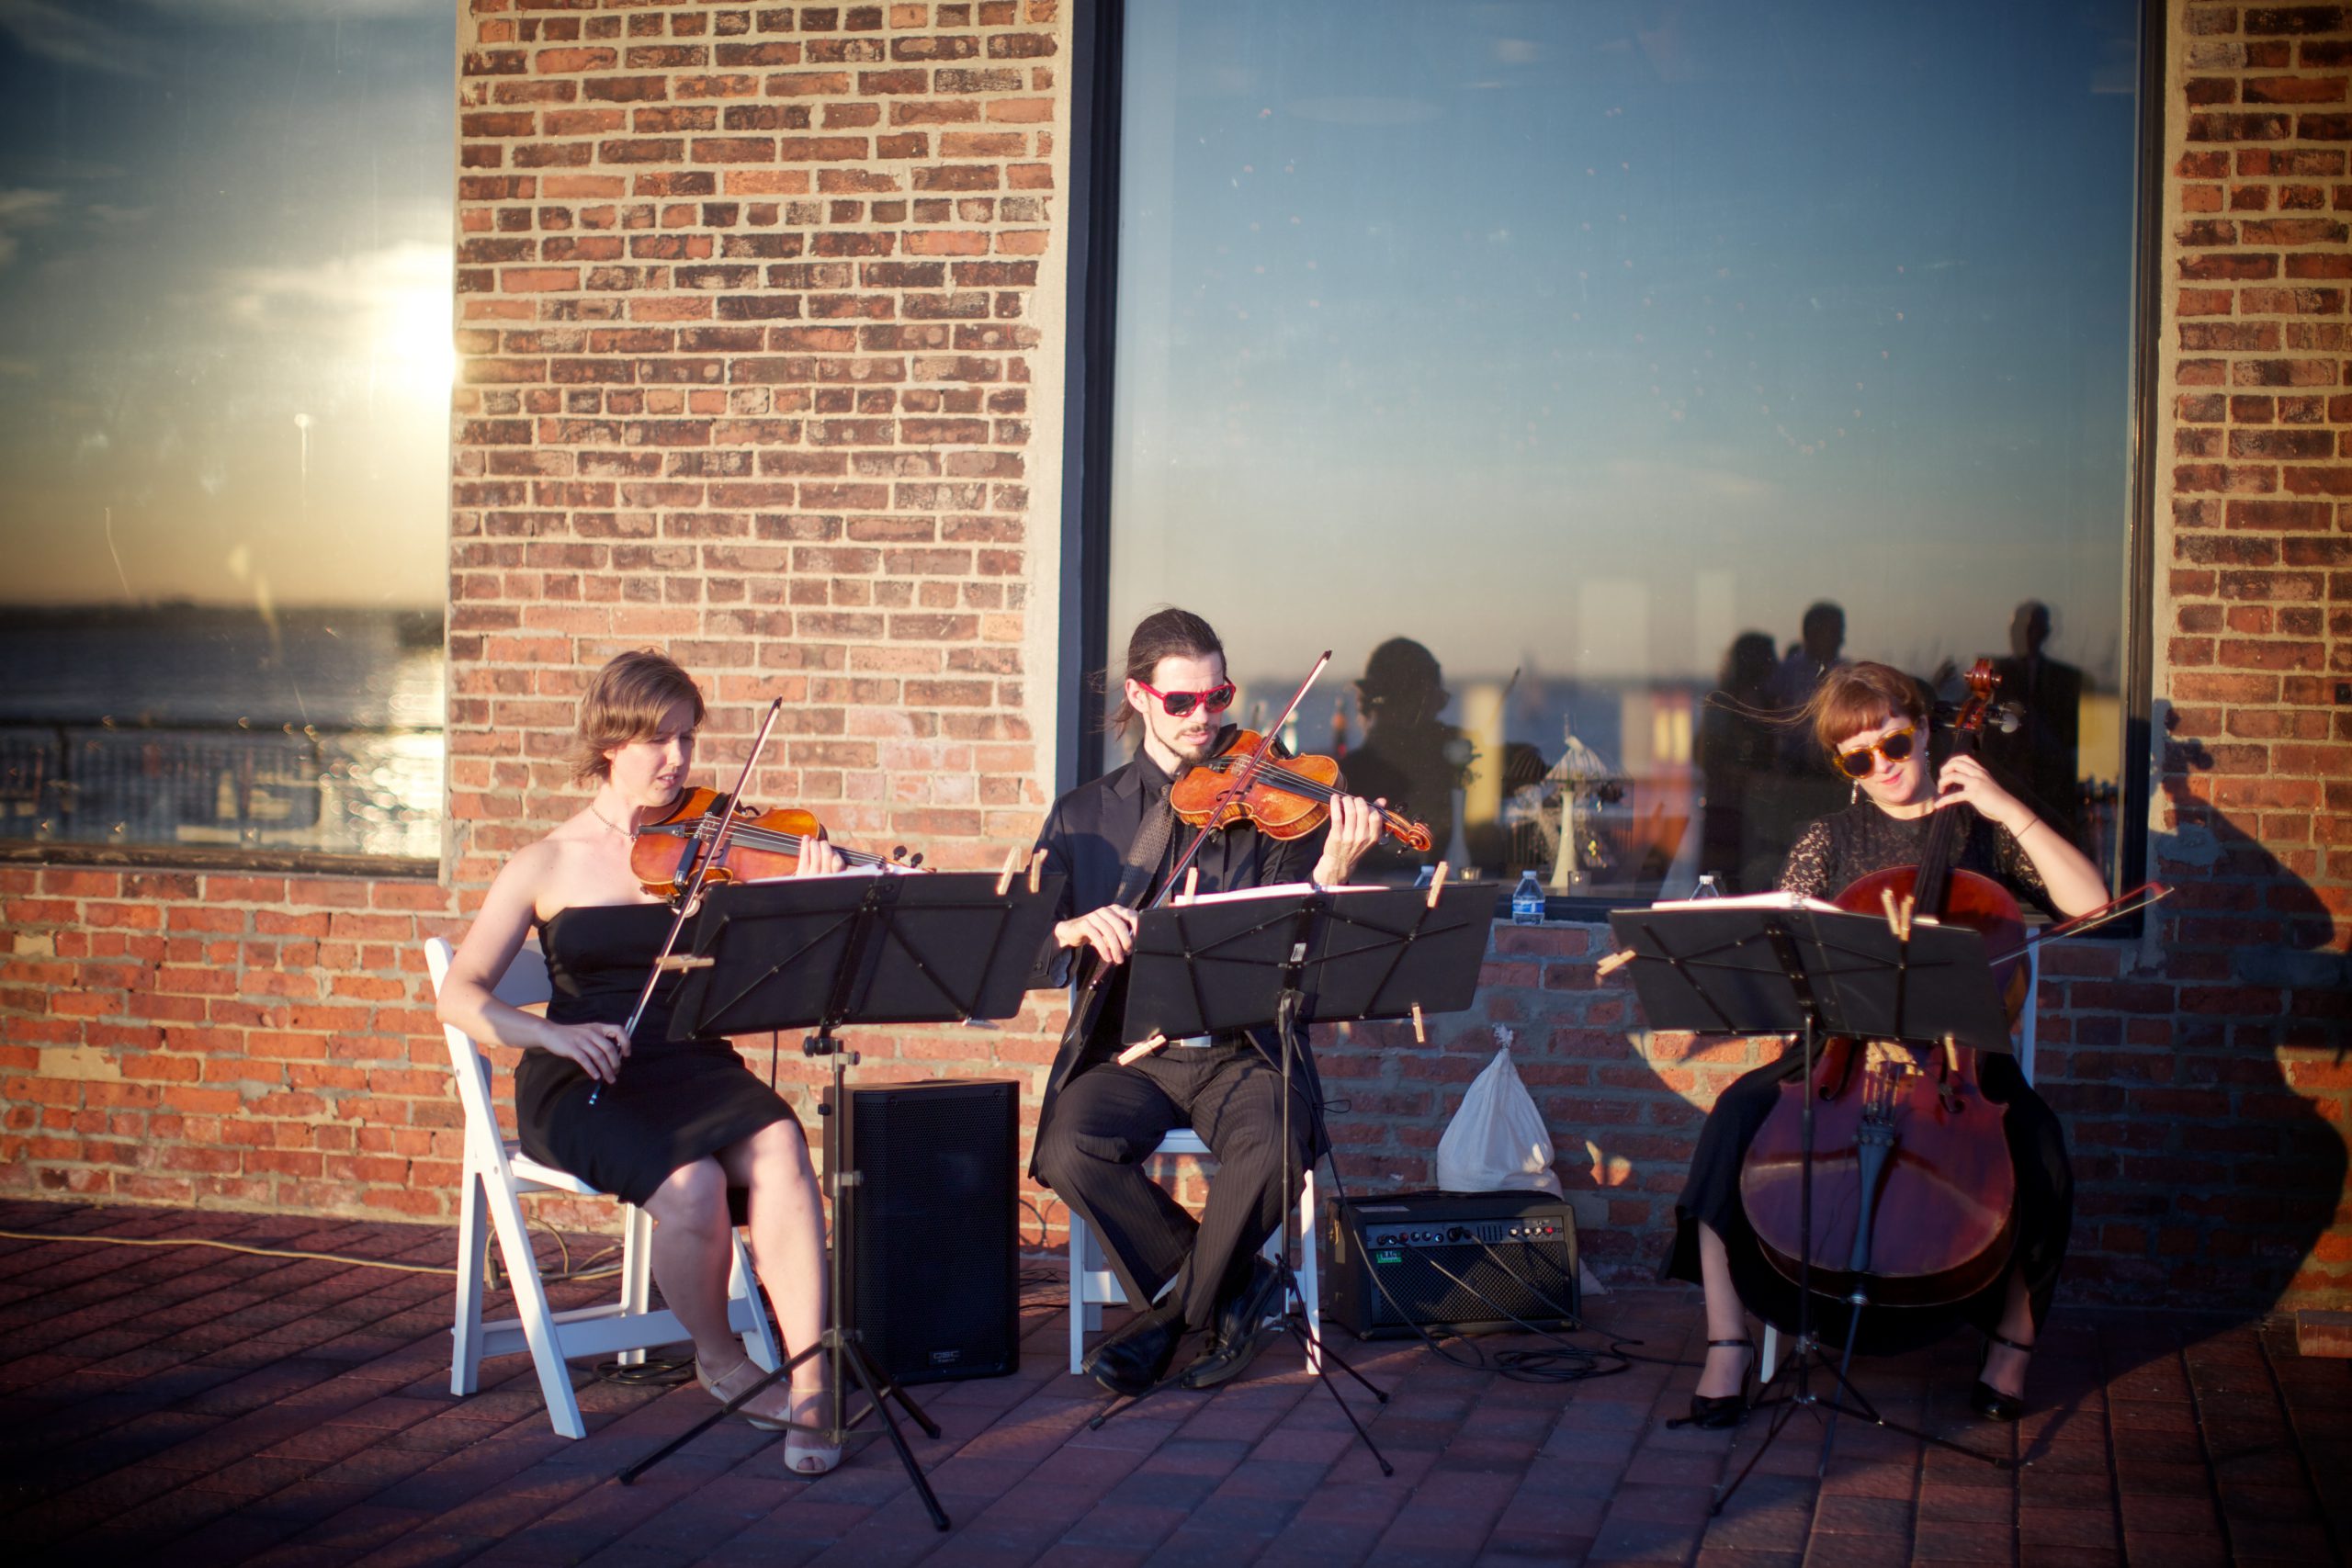 String trio plays pop music at wedding cocktail hour